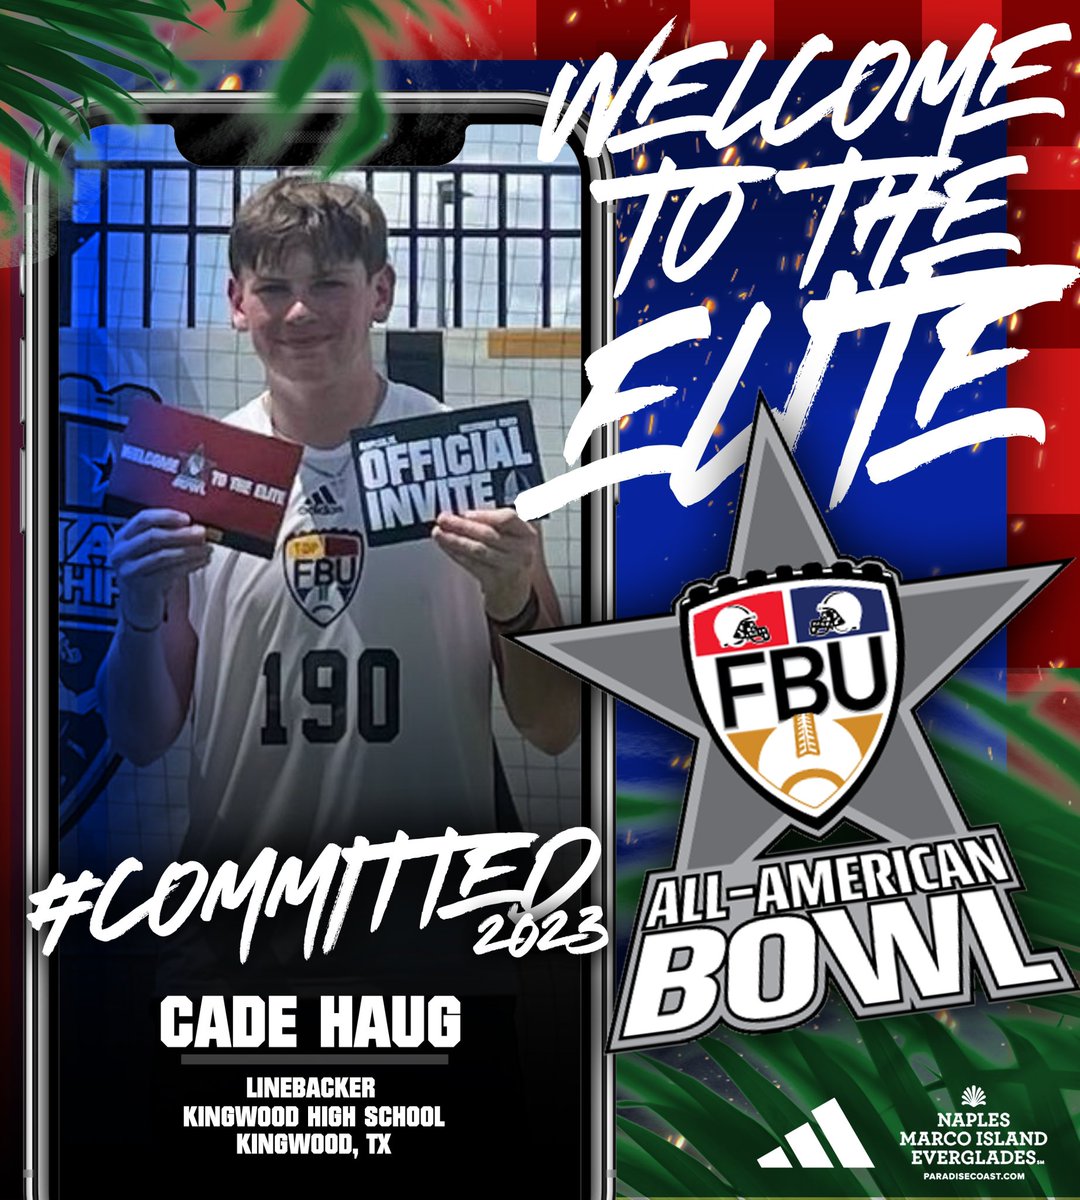 WELCOME TO THE ELITE 🌴 #FBUPathAlum @cadehaug punched his ticket to the #FBUAllAmerican Bowl 2023 👀 See you in Naples, FL this December 🔥 #FBU #GetBetterHere